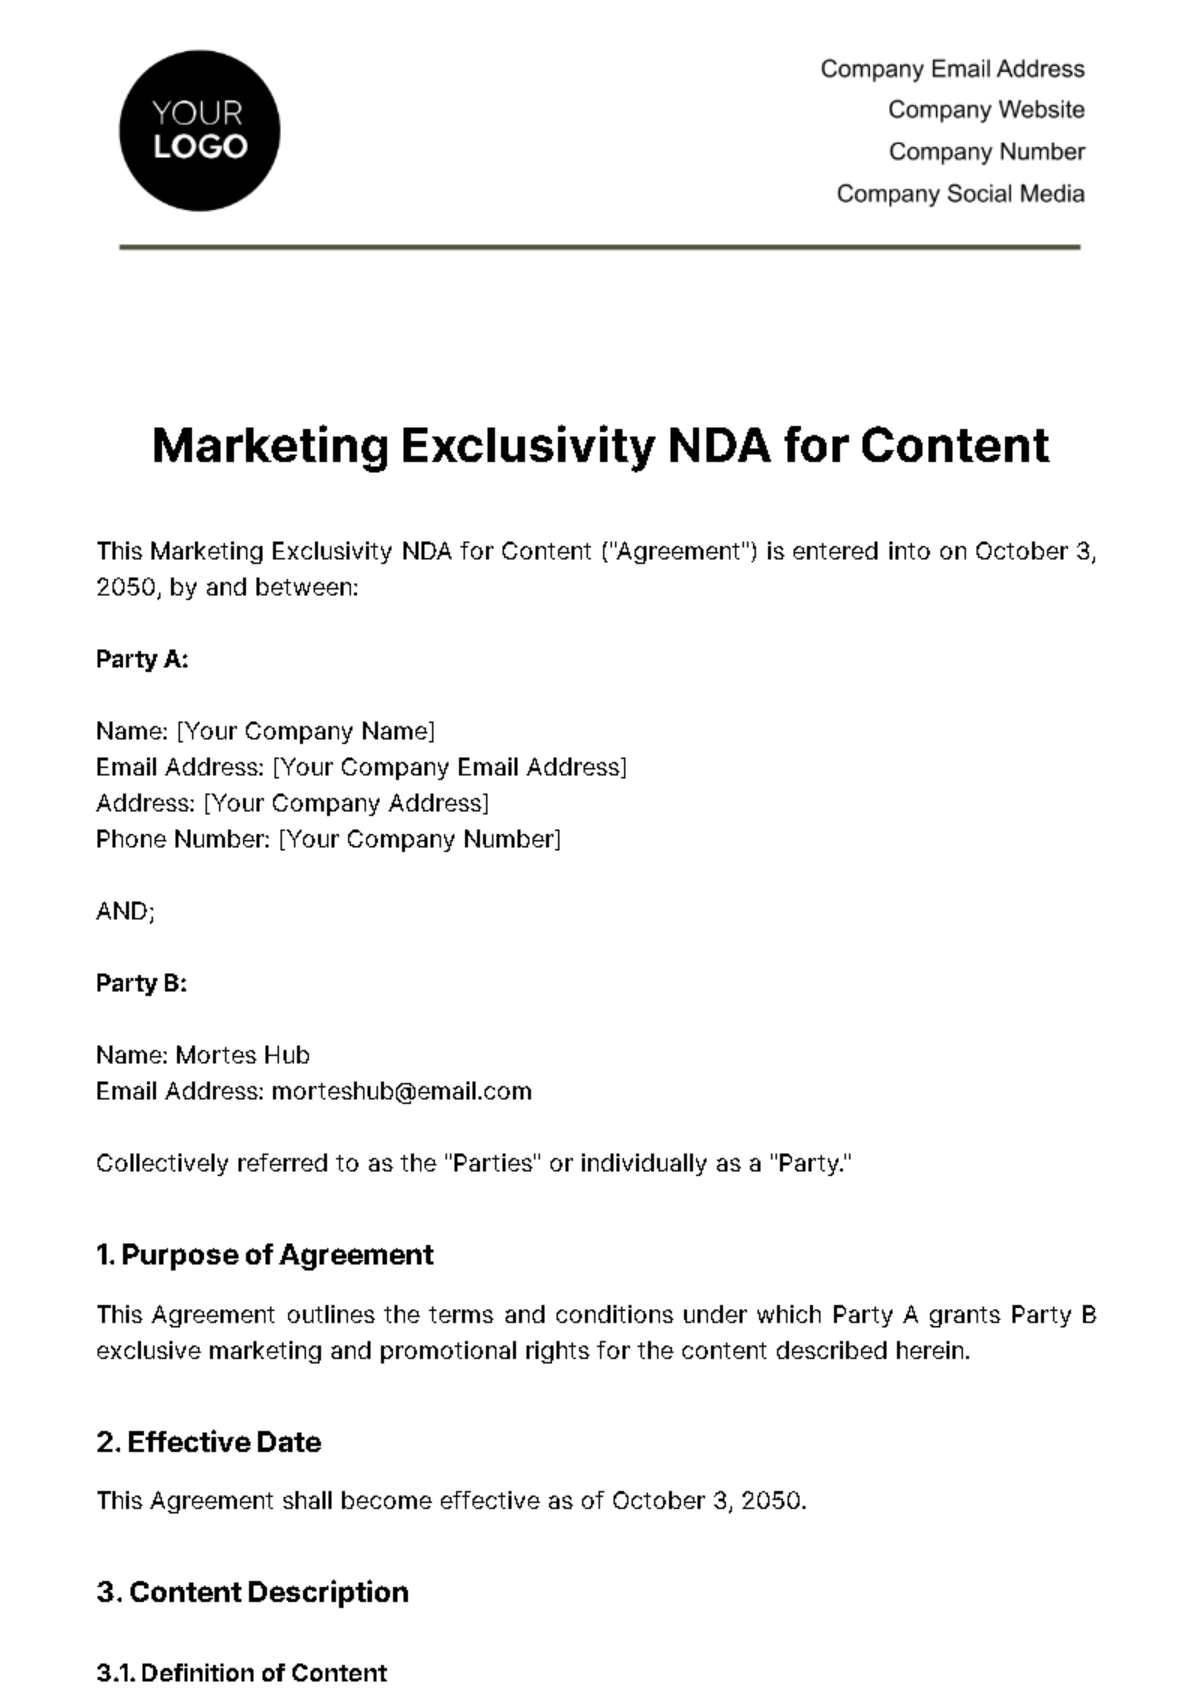 Marketing Exclusivity NDA for Content Template